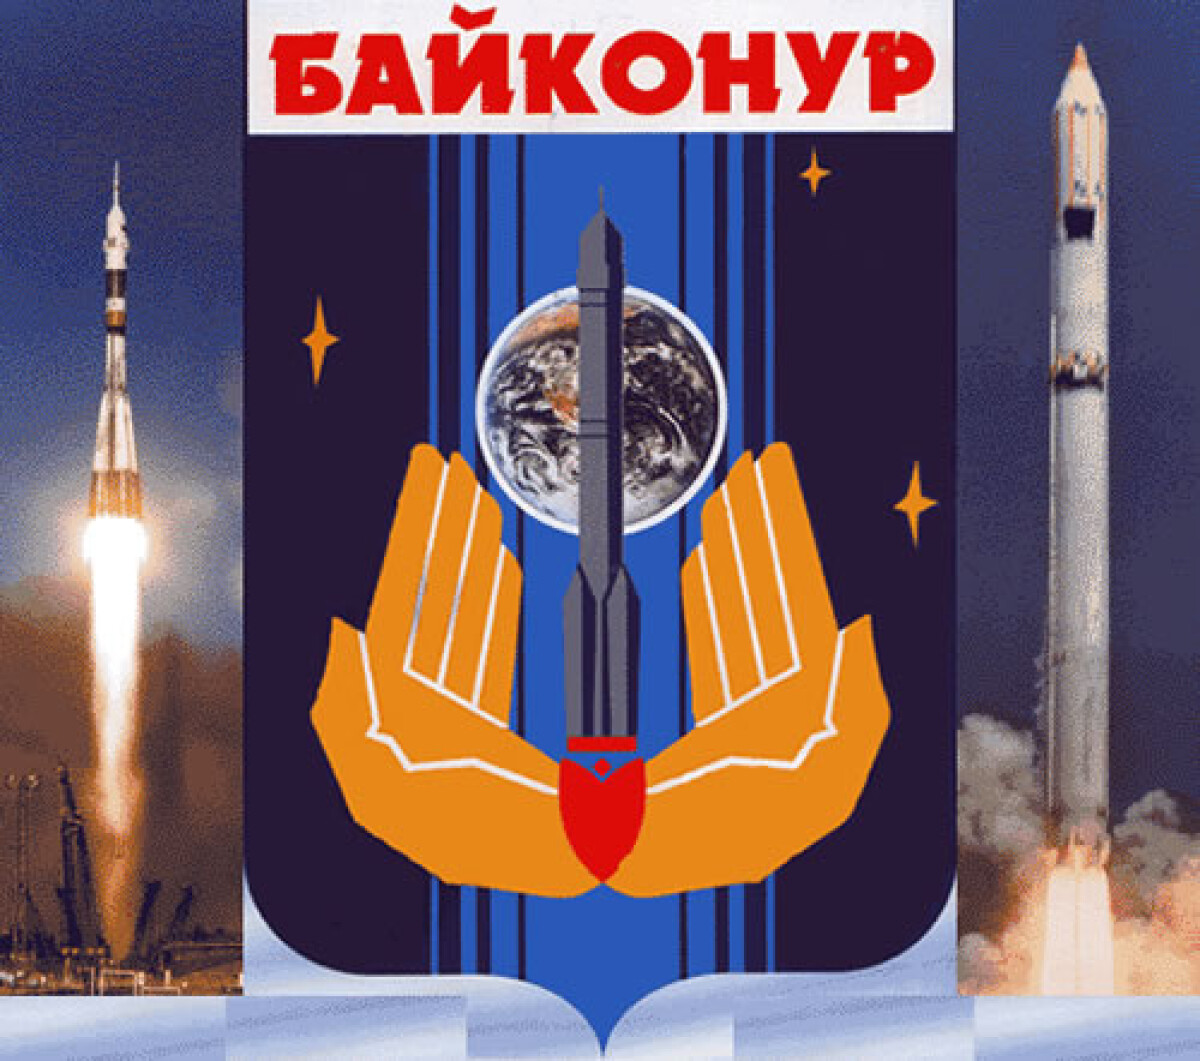 Cultural walk: Museum of history of Baikonur spaceport - e-history.kz